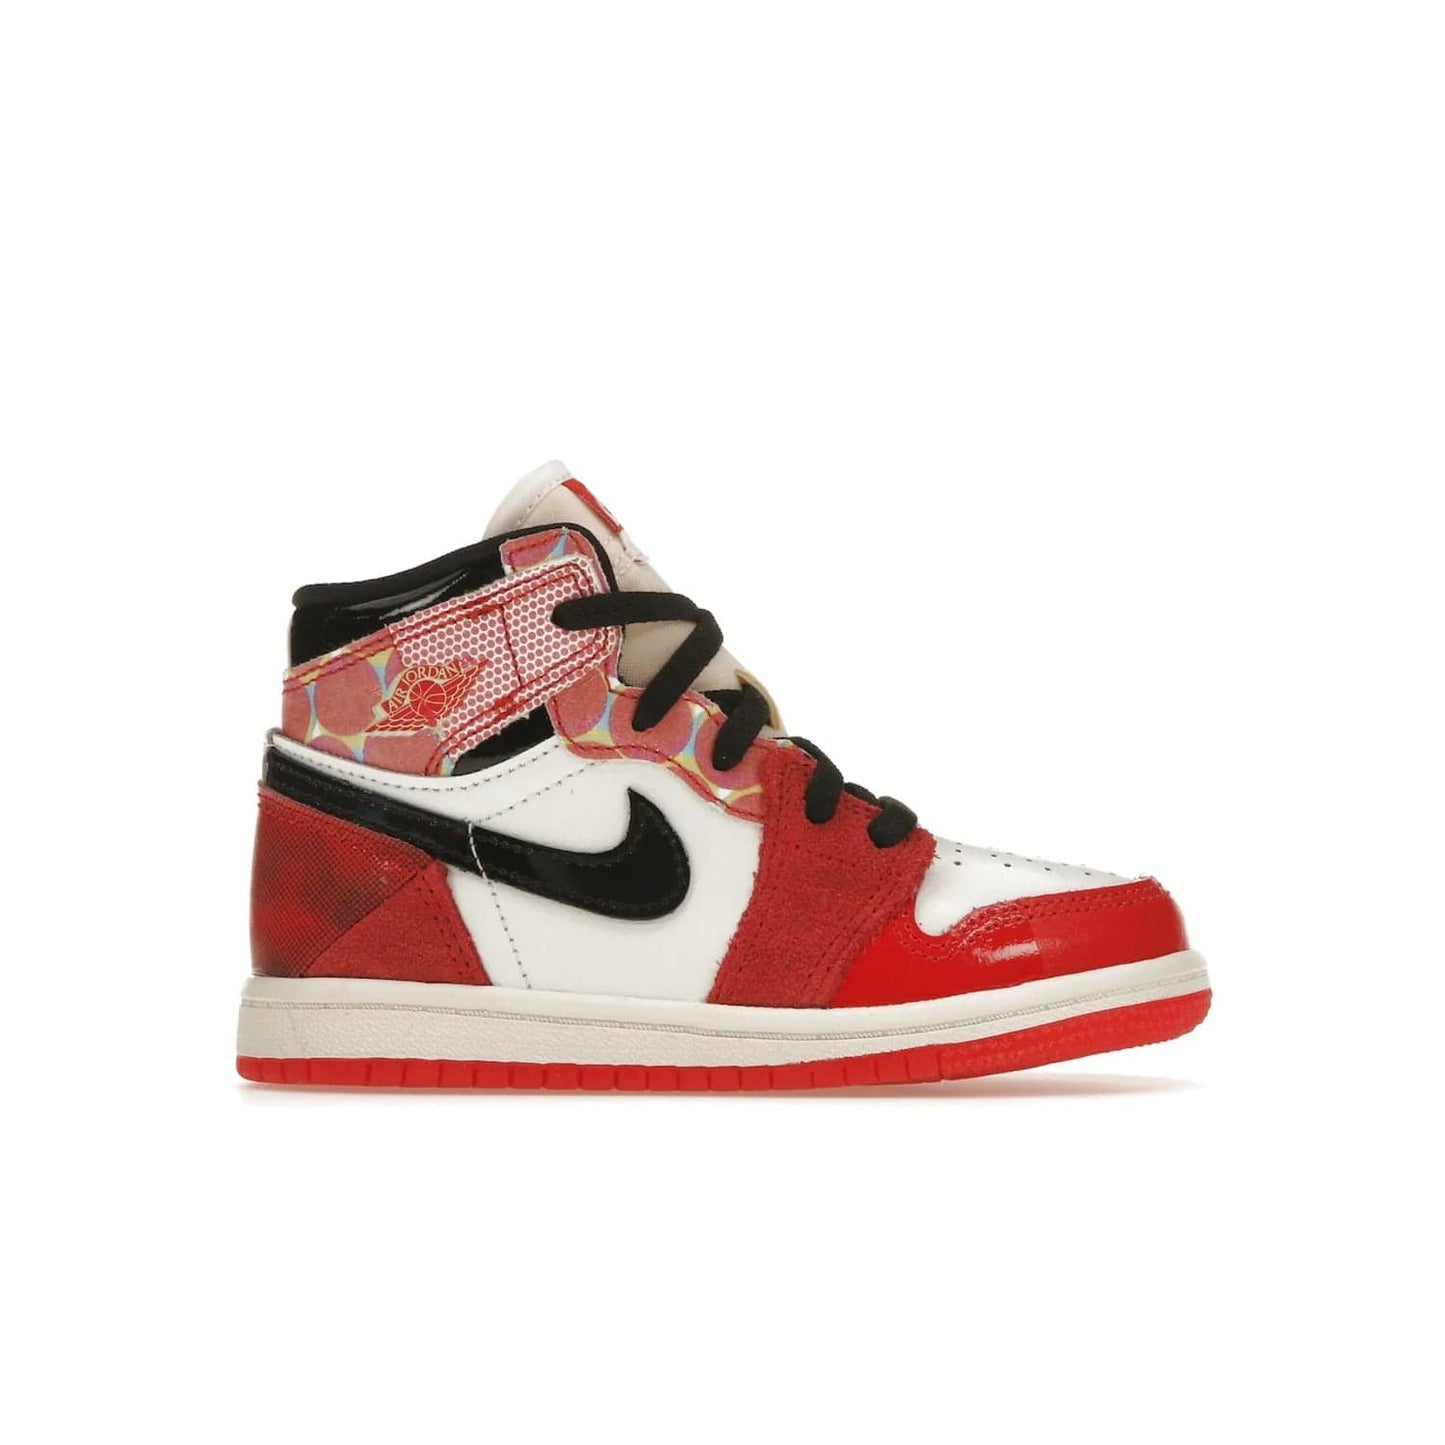 Jordan 1 High OG Spider-Man Across the Spider-Verse (TD) - Image 1 - Only at www.BallersClubKickz.com - The University Red/Black/White Spider-Man Across the Spider-Verse Air Jordan 1 High OG features bold accents and an eye-catching design. Releasing May 2023.